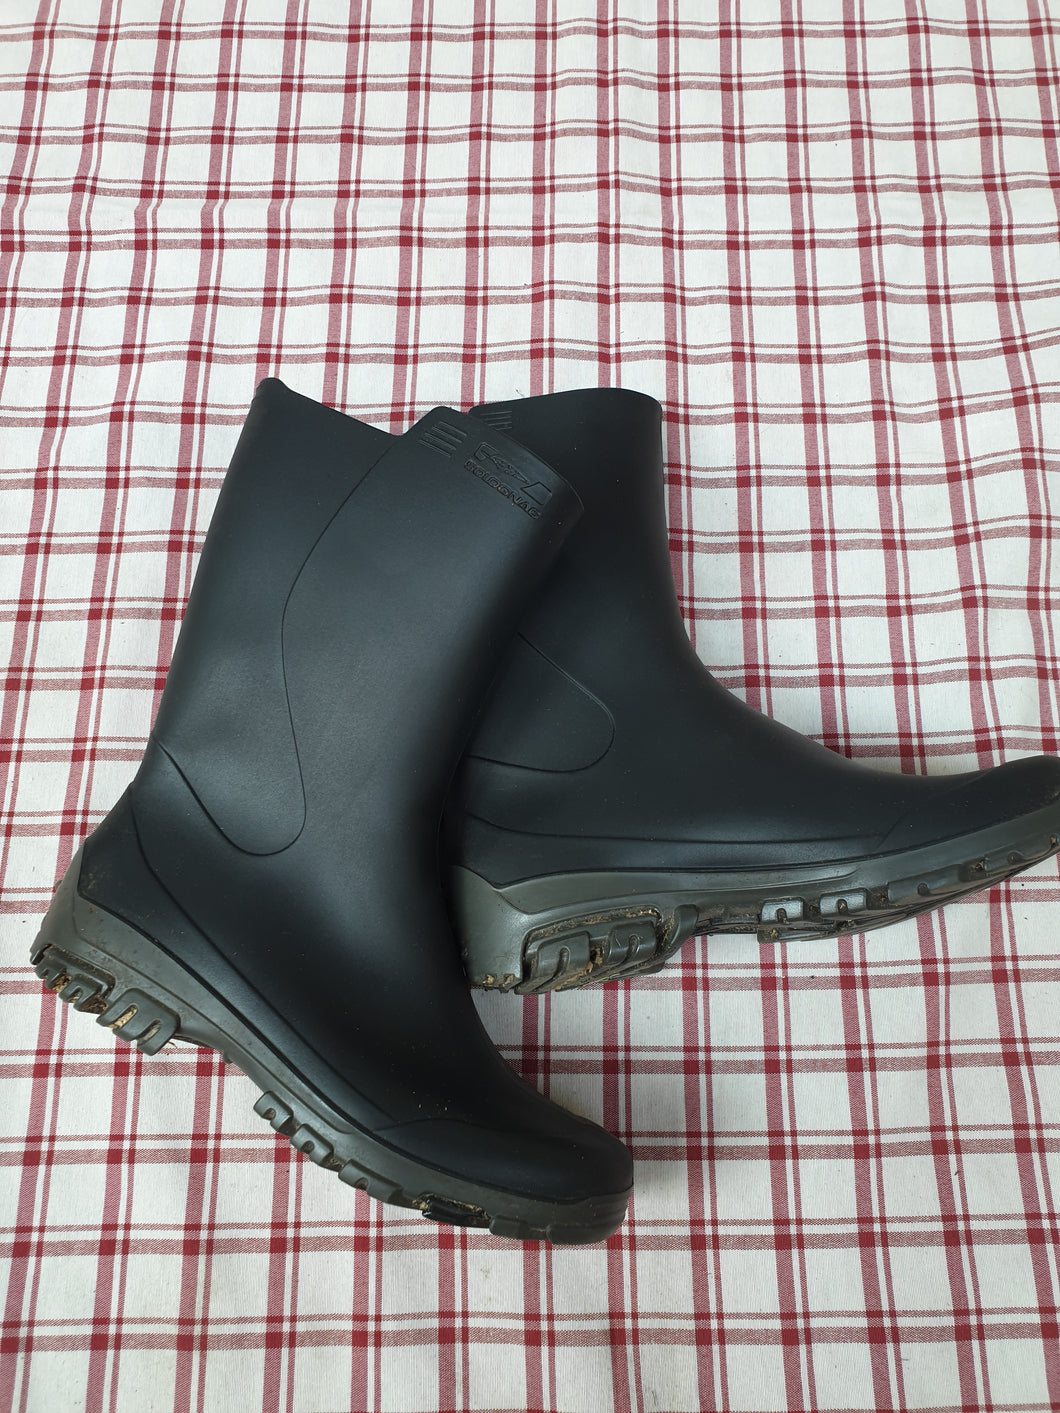 Like new solognac wellies, black, size 4/5 FREE POSTAGE  ✅